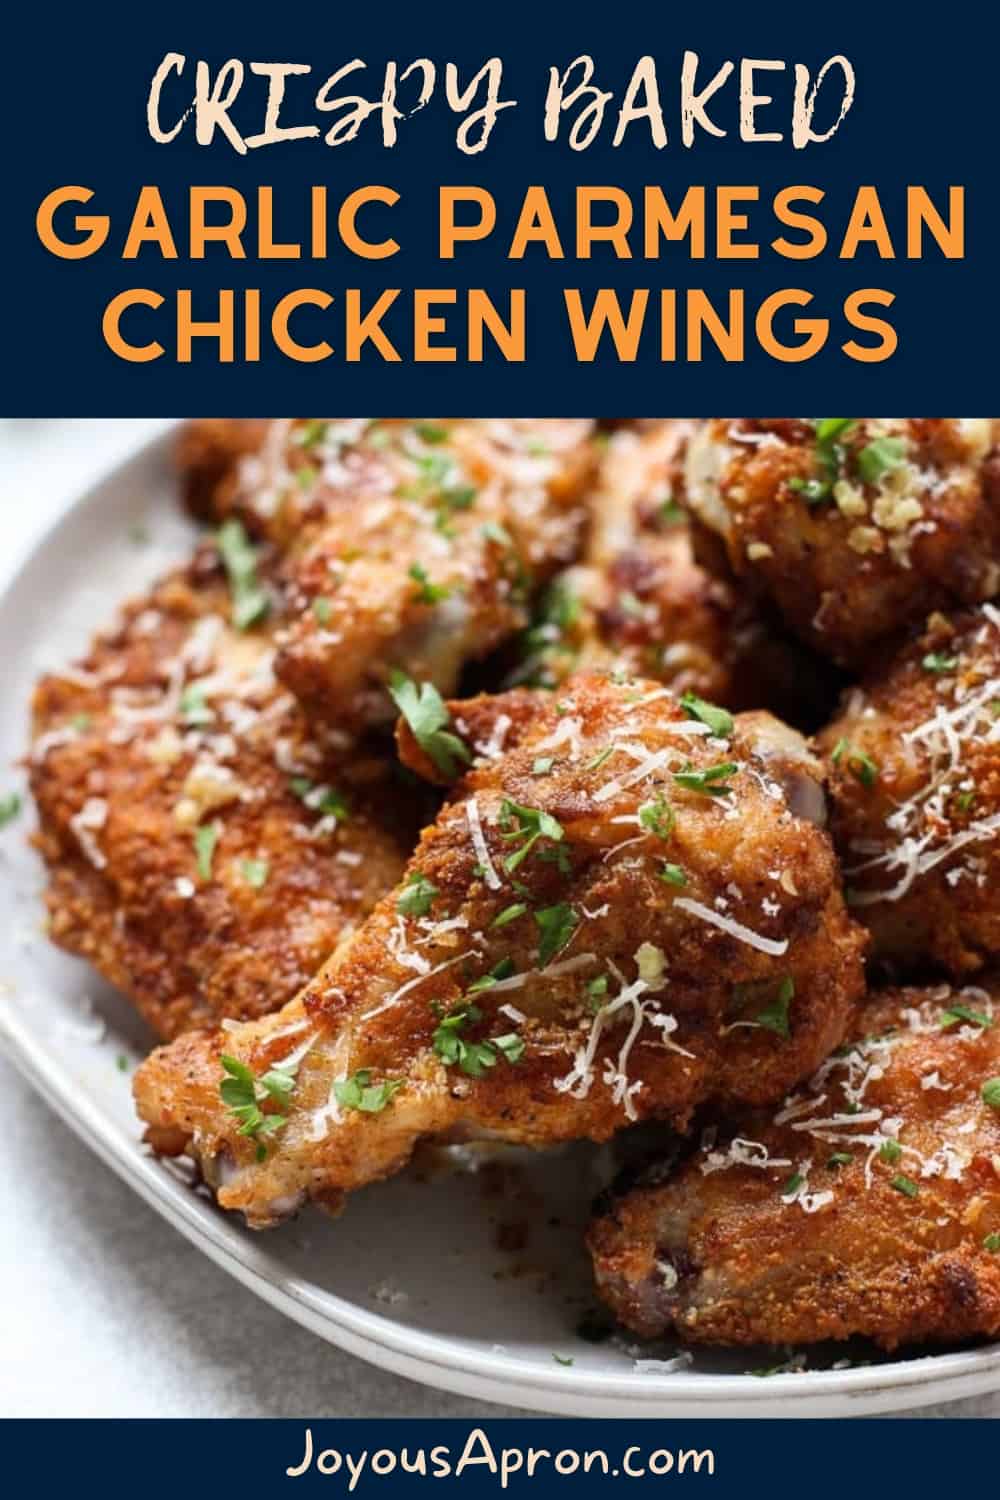 Baked Garlic Parmesan Chicken Wings - baked wings recipe! It's much healthier and just as crispy and yummy. These wings are coated with butter, parmesan and garlic - boasting so much flavor. A perfect main dish and/or appetizer! via @joyousapron